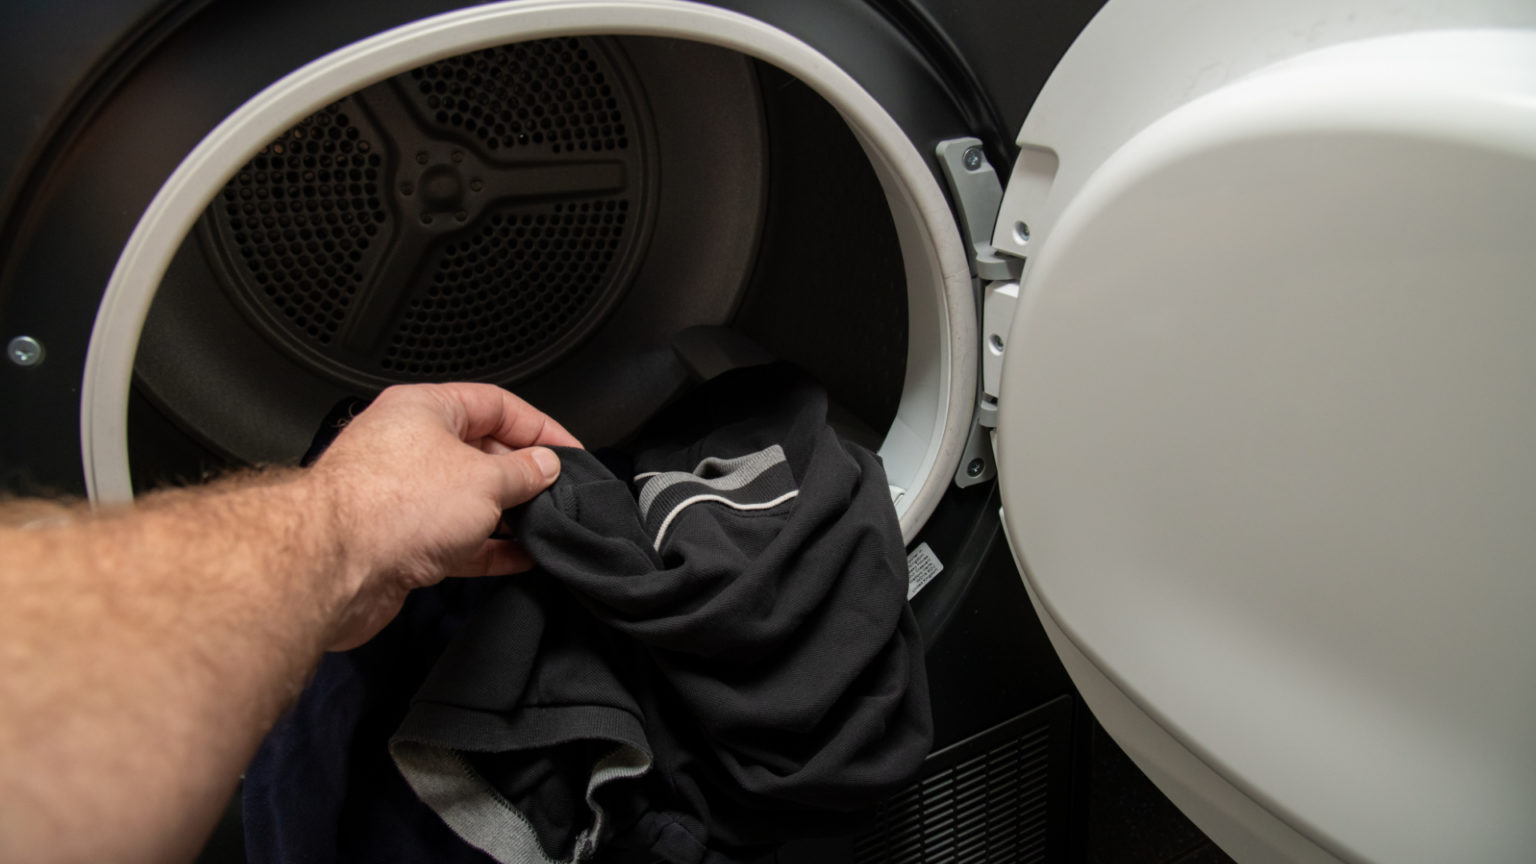 How to Fix a Samsung Dryer Not Heating - Authorized Service